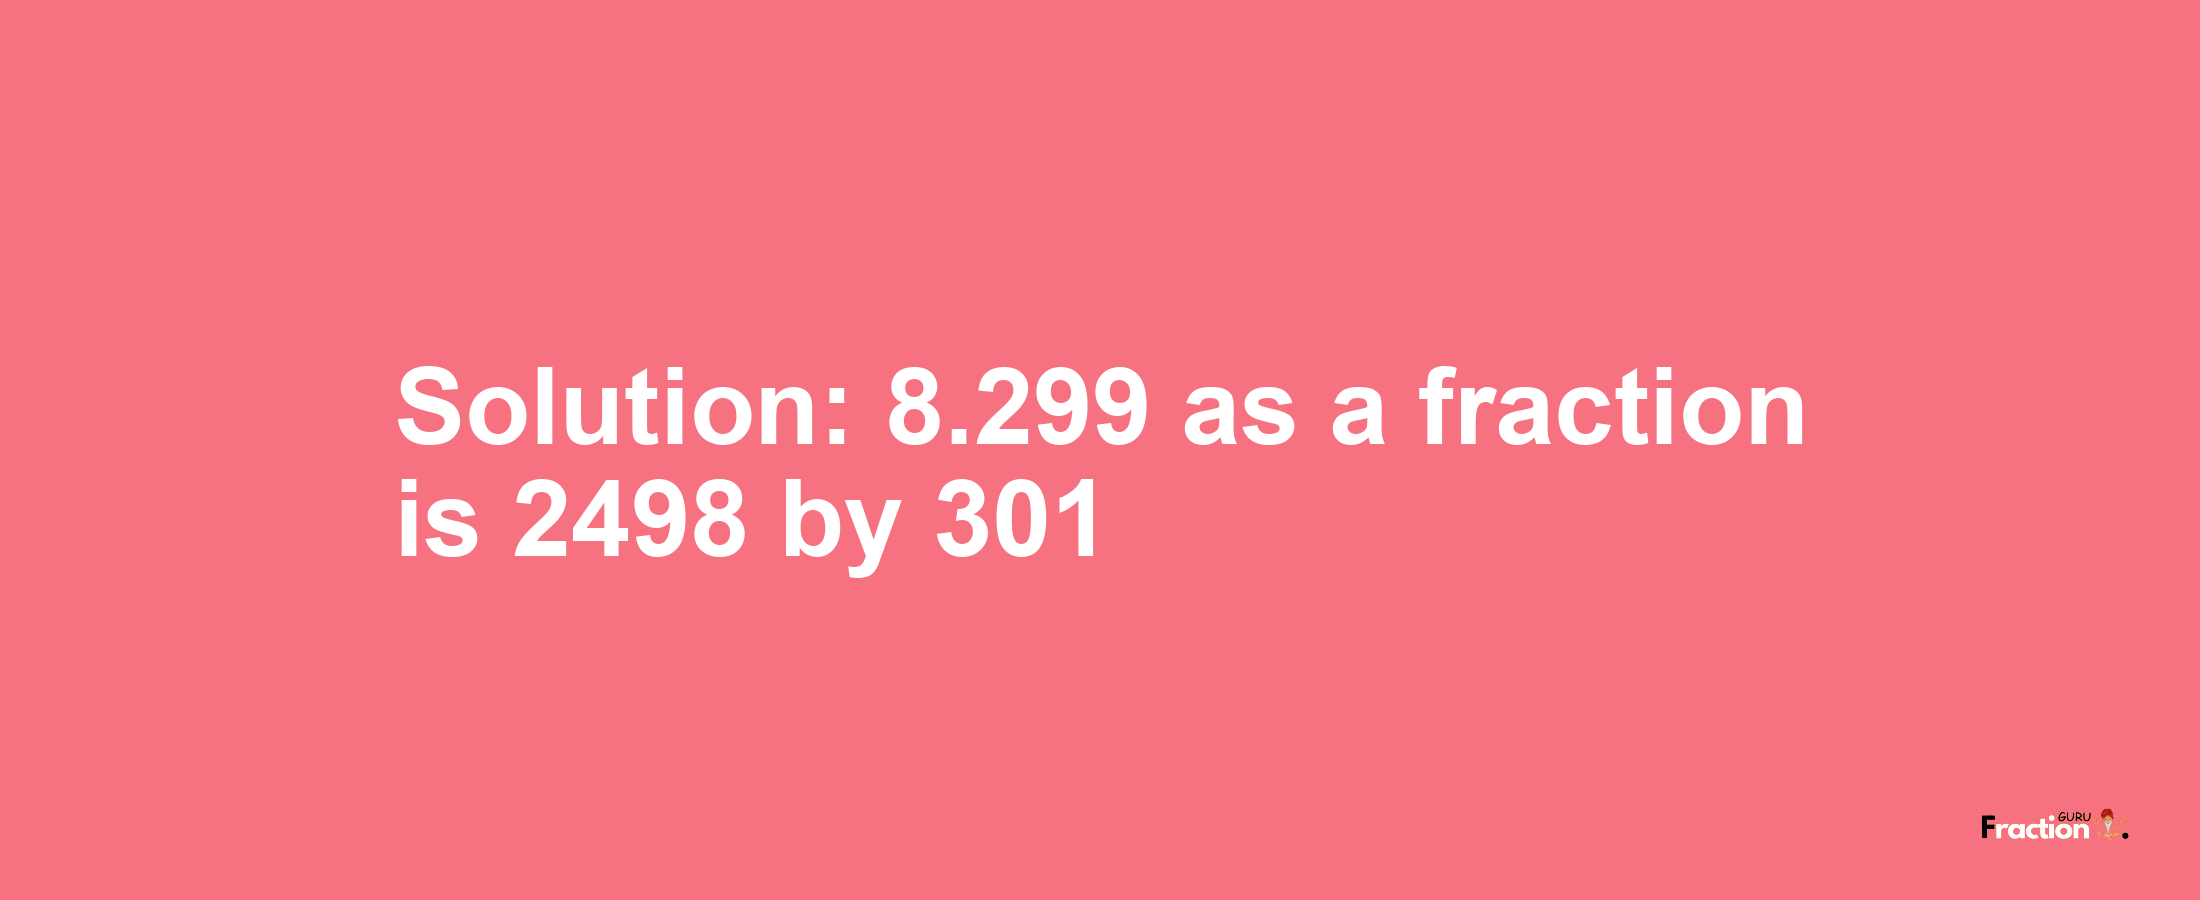 Solution:8.299 as a fraction is 2498/301